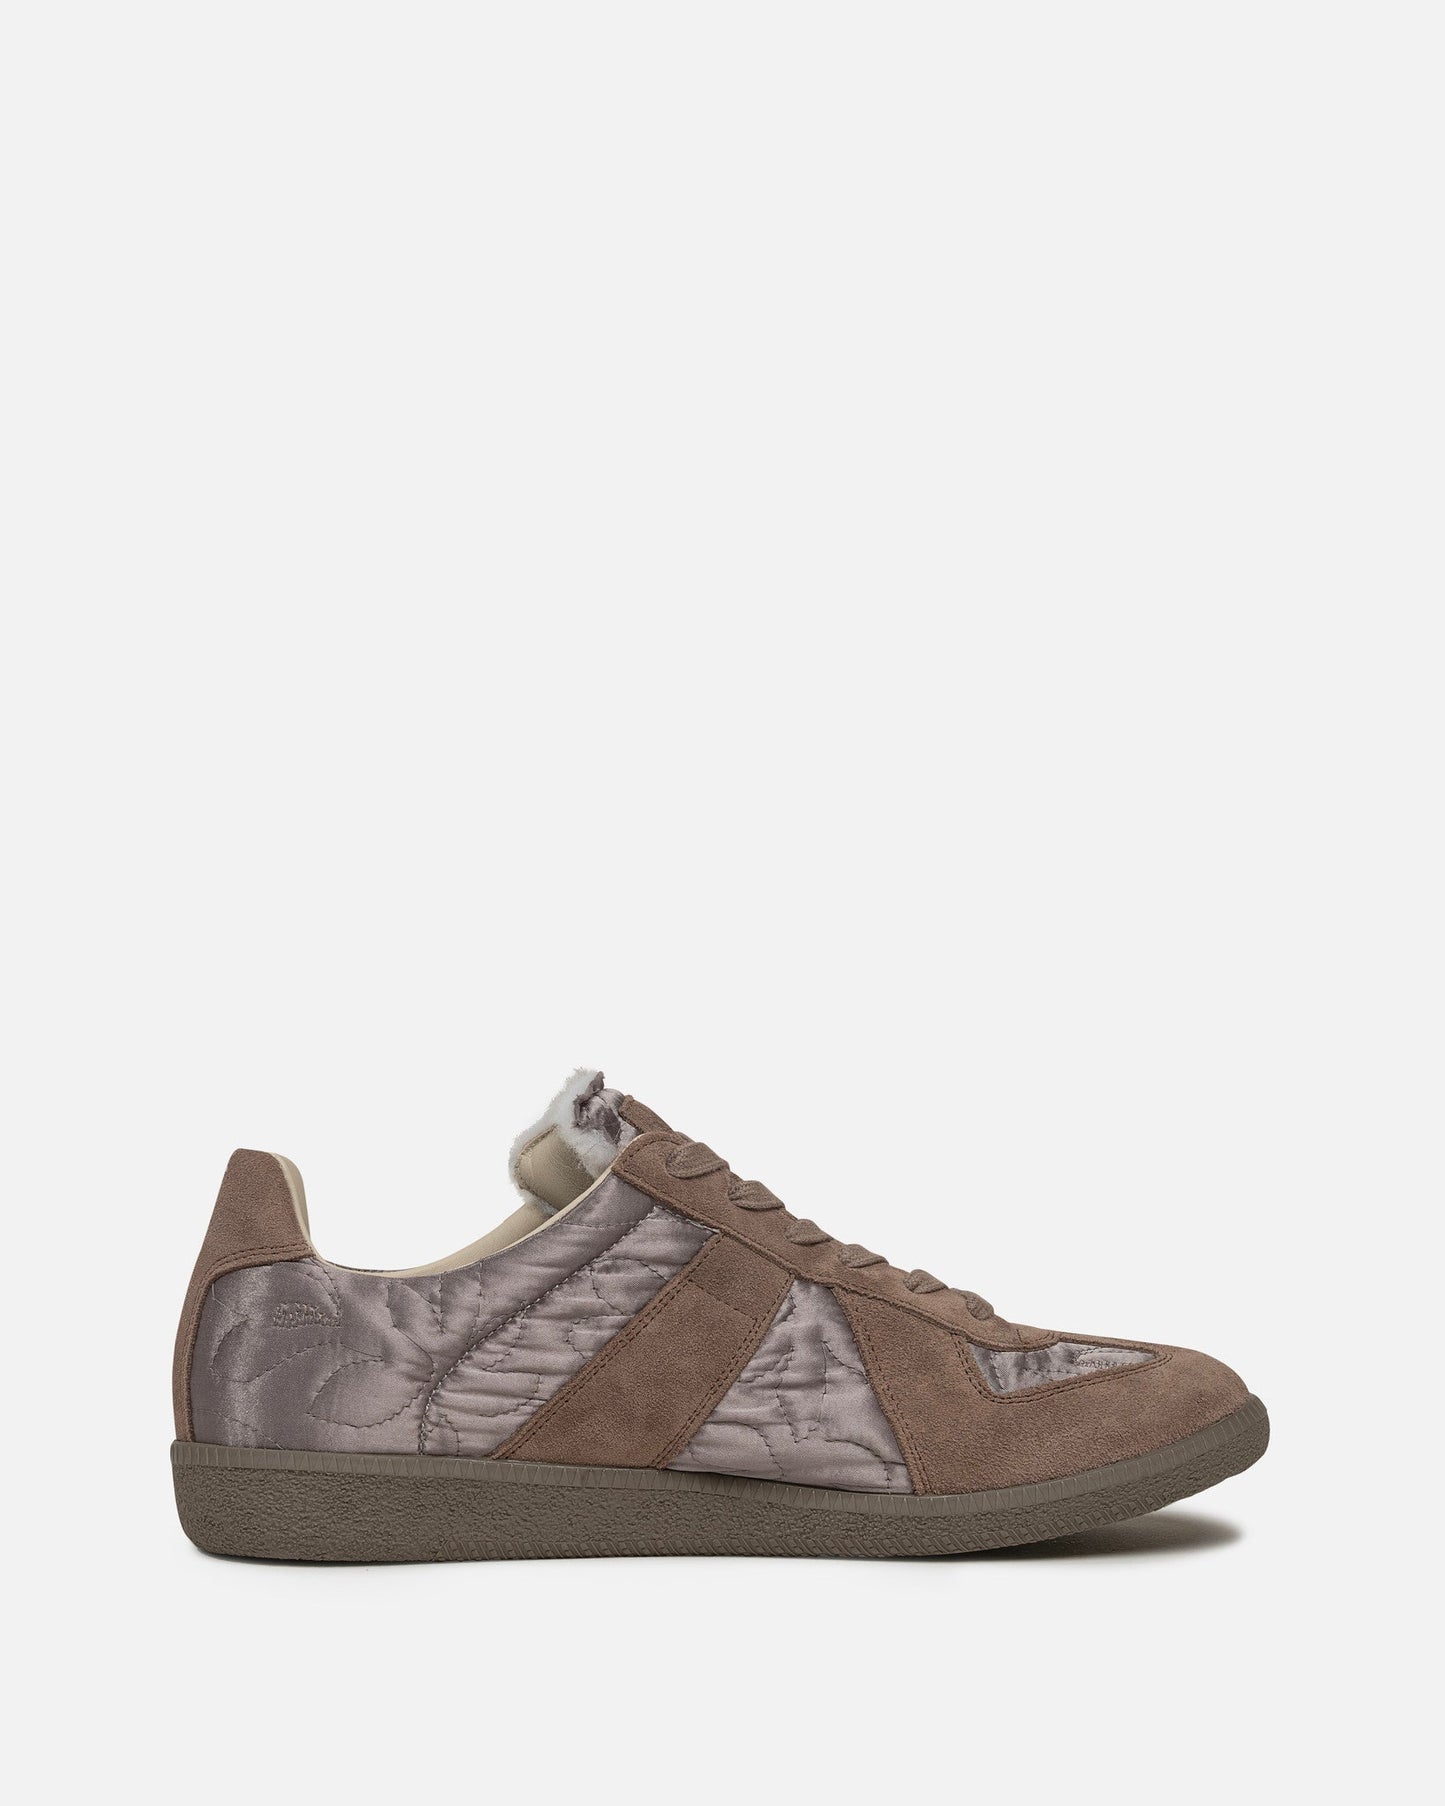 Maison Margiela Men's Sneakers Embroidered Replica Sneakers in Taupe